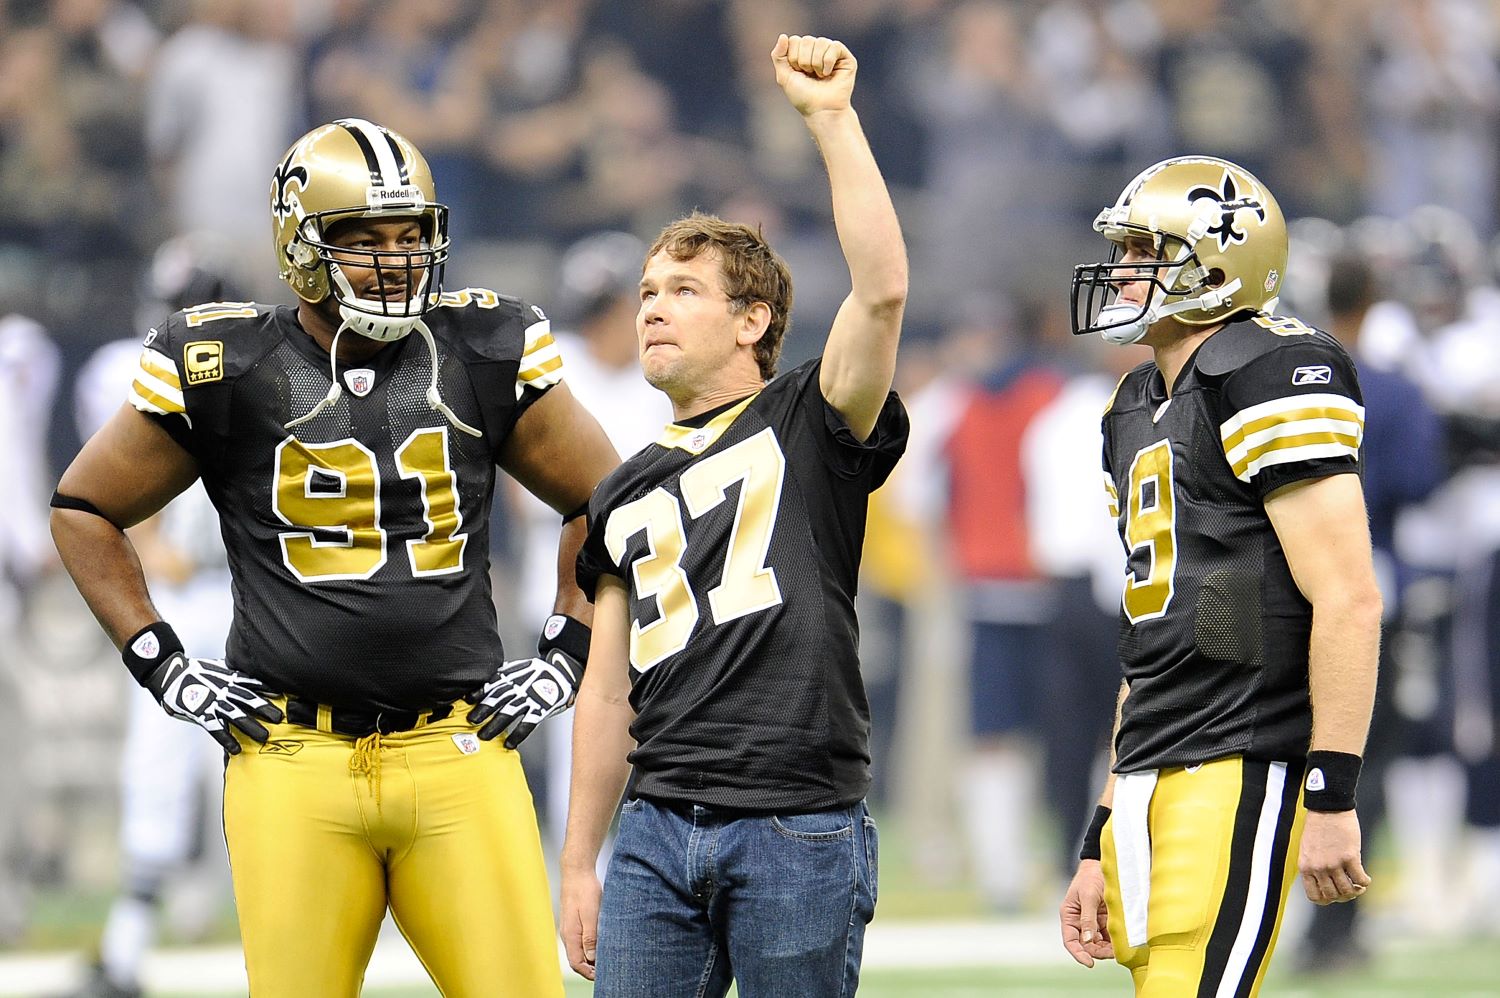 Drew Brees used a jump rope to win a free sushi dinner from Saints legend Steve Gleason.